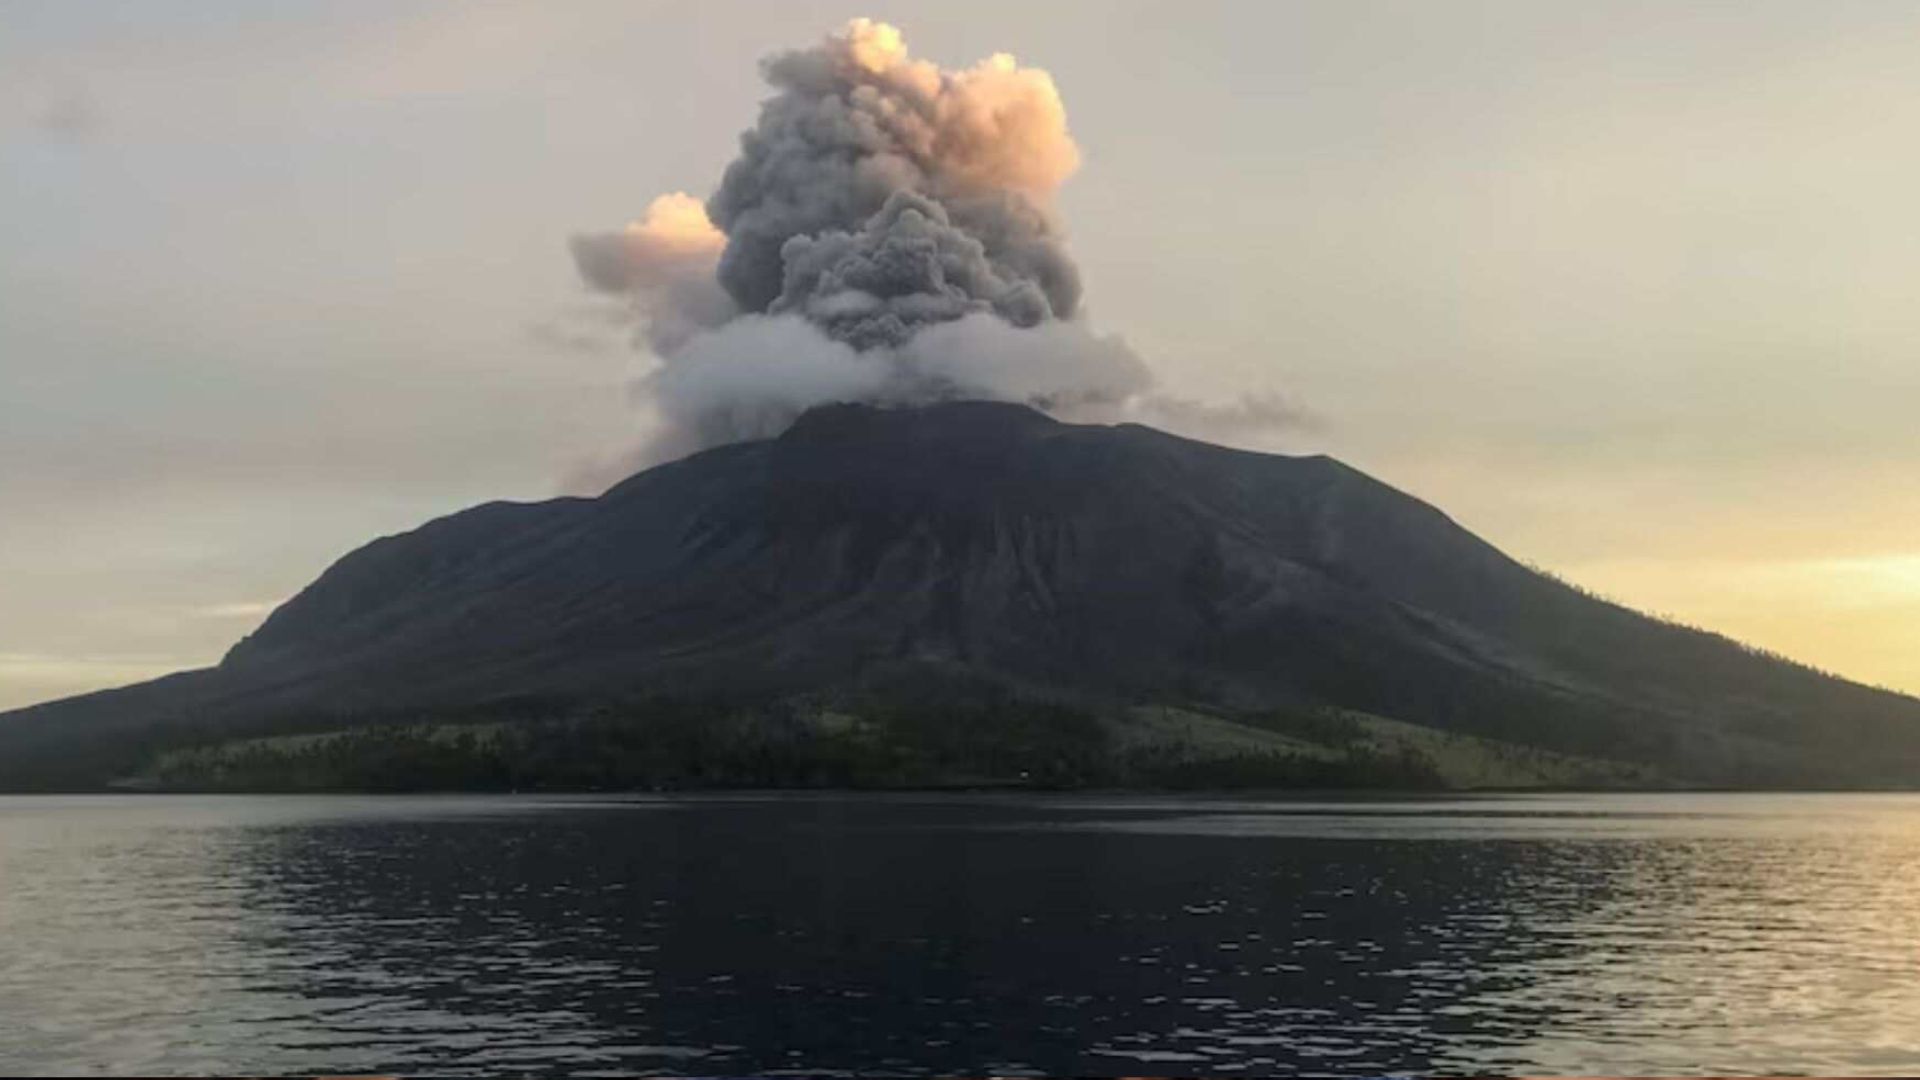 Indonesia Relocates 10,000 People in Wake of Volcano Eruption